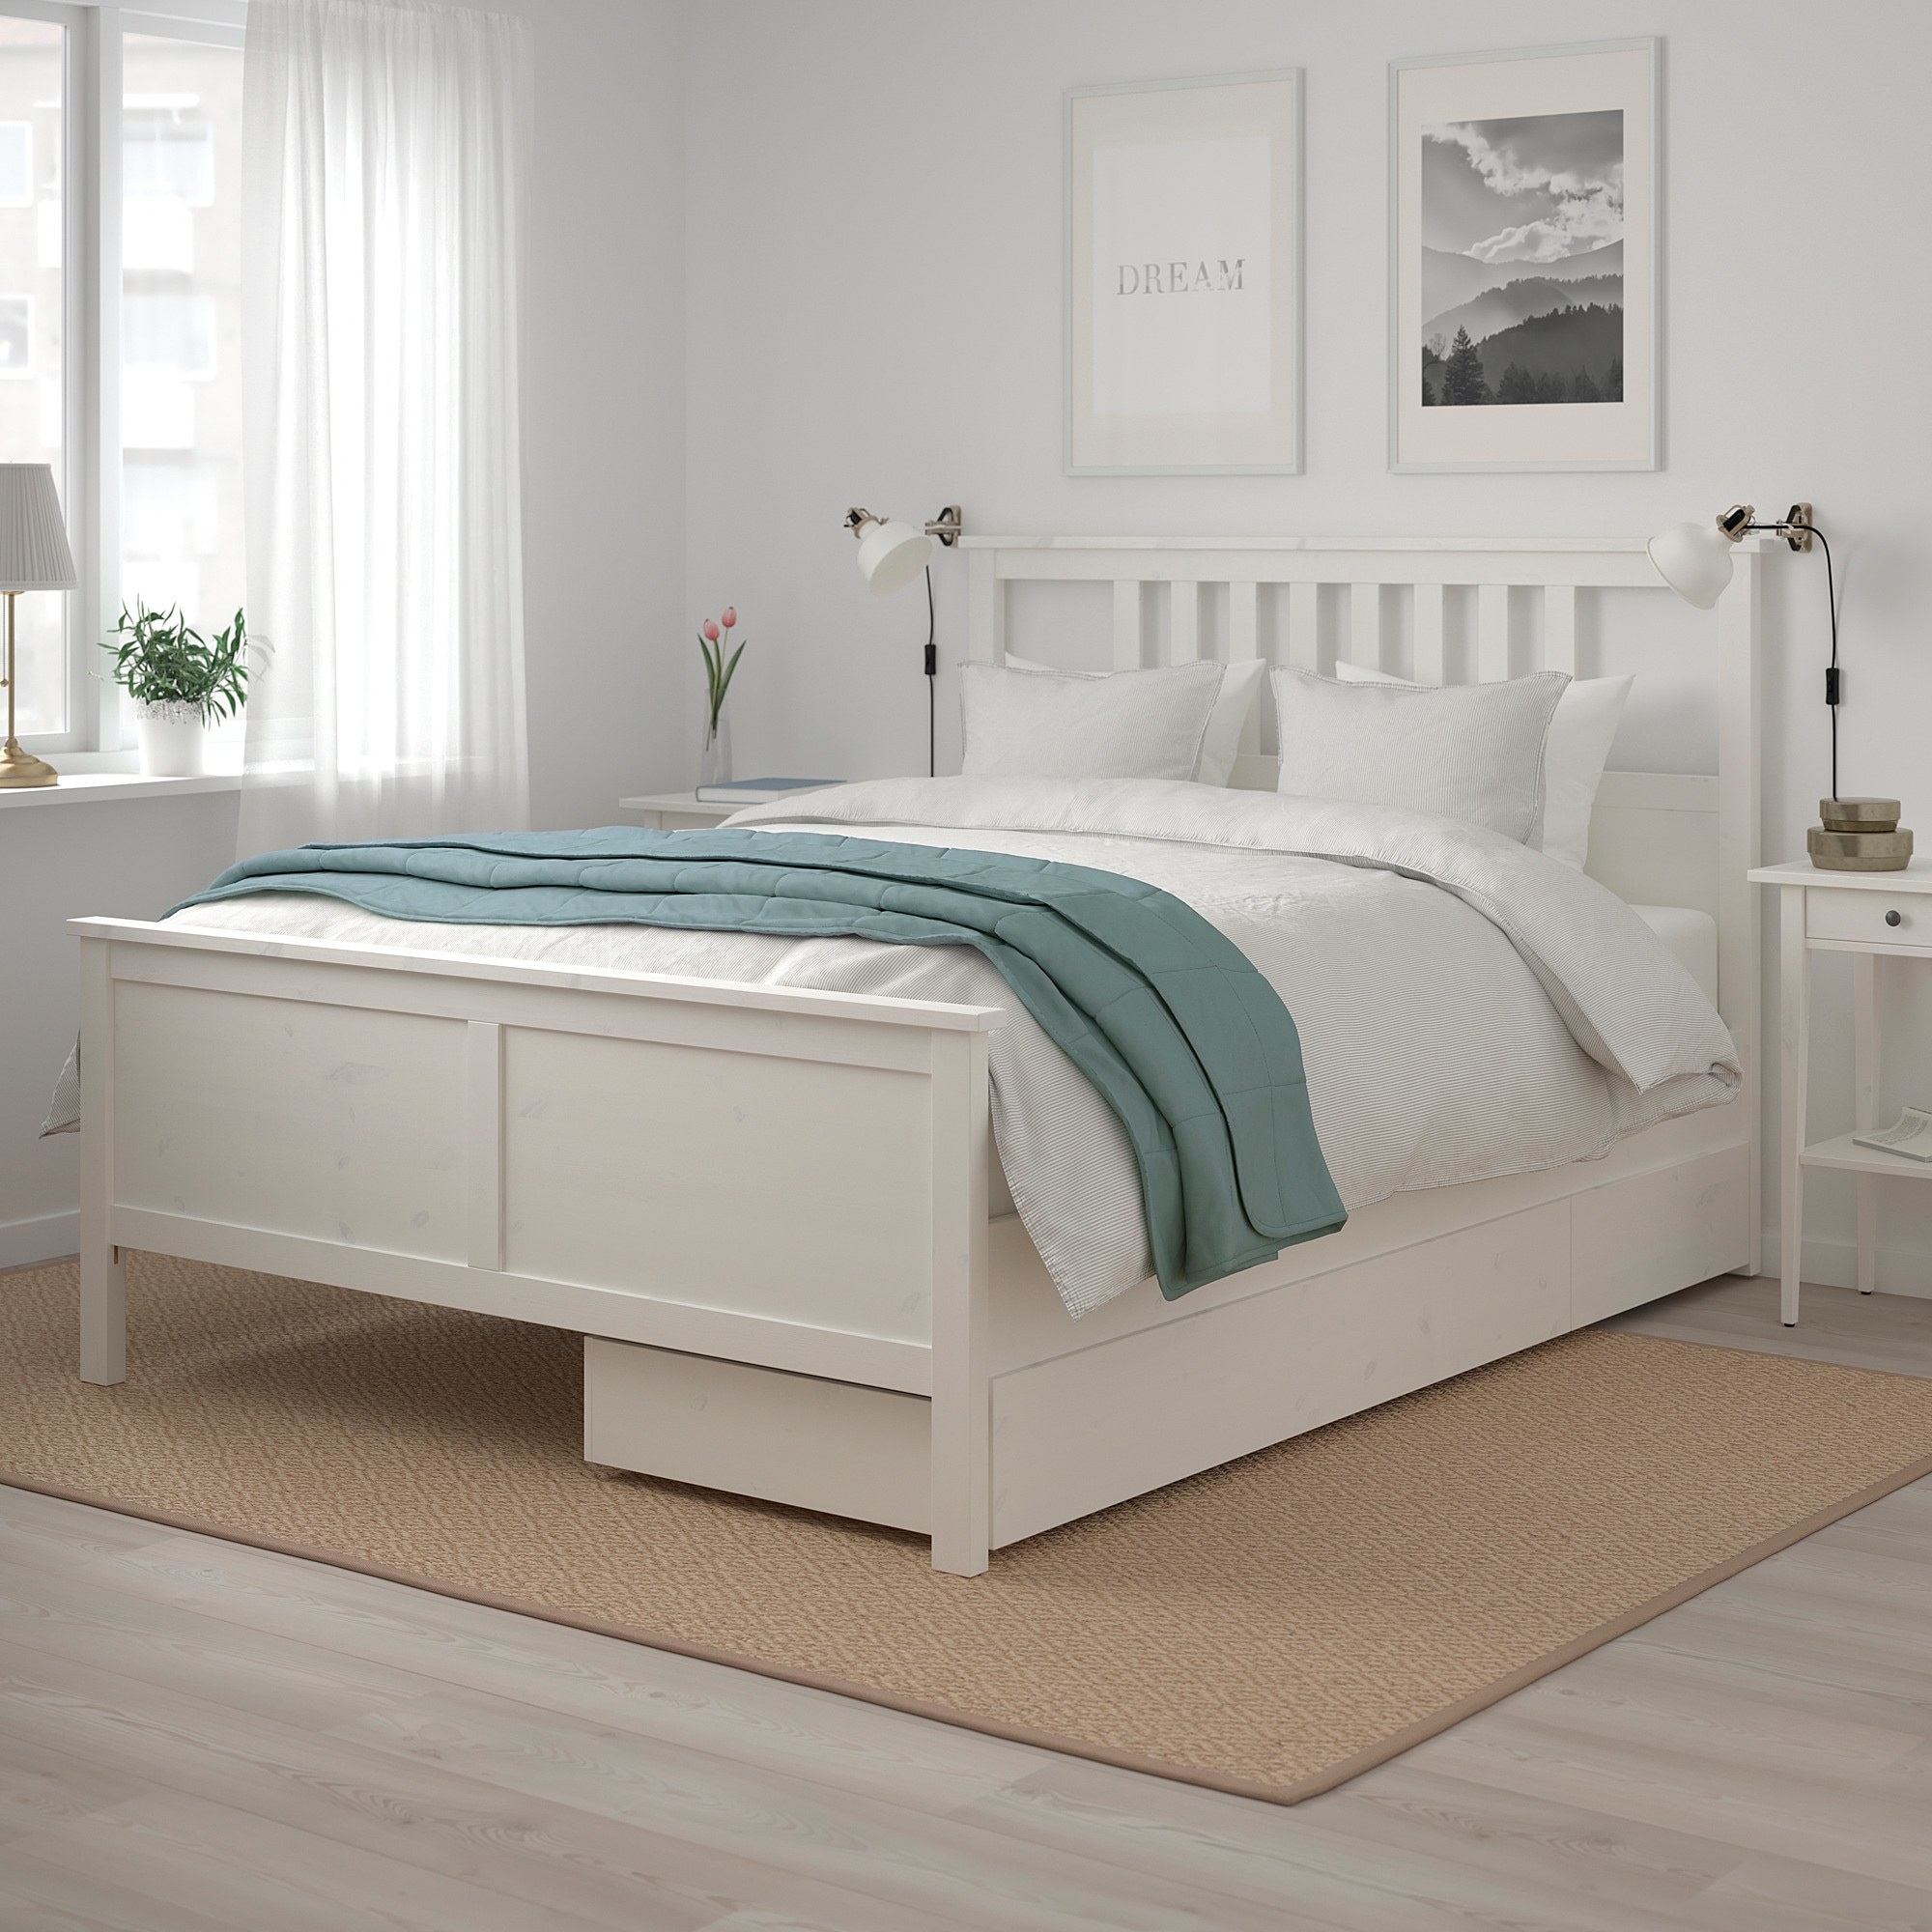 27 Bed Frames That Only Look, Low Bed Frames Ikea